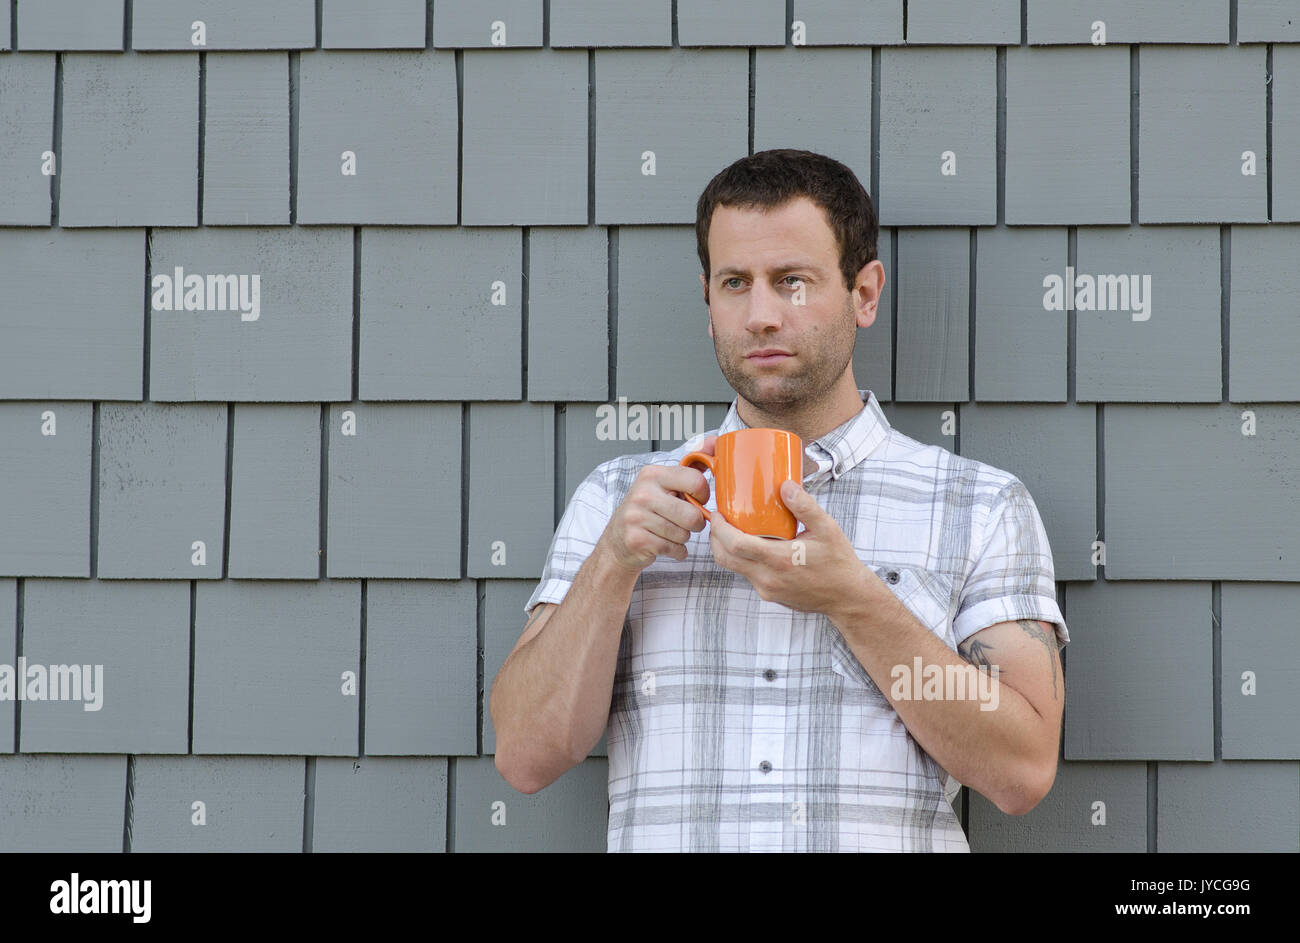 Man holding an orange coffee cup with two hands with a gray background. Stock Photo